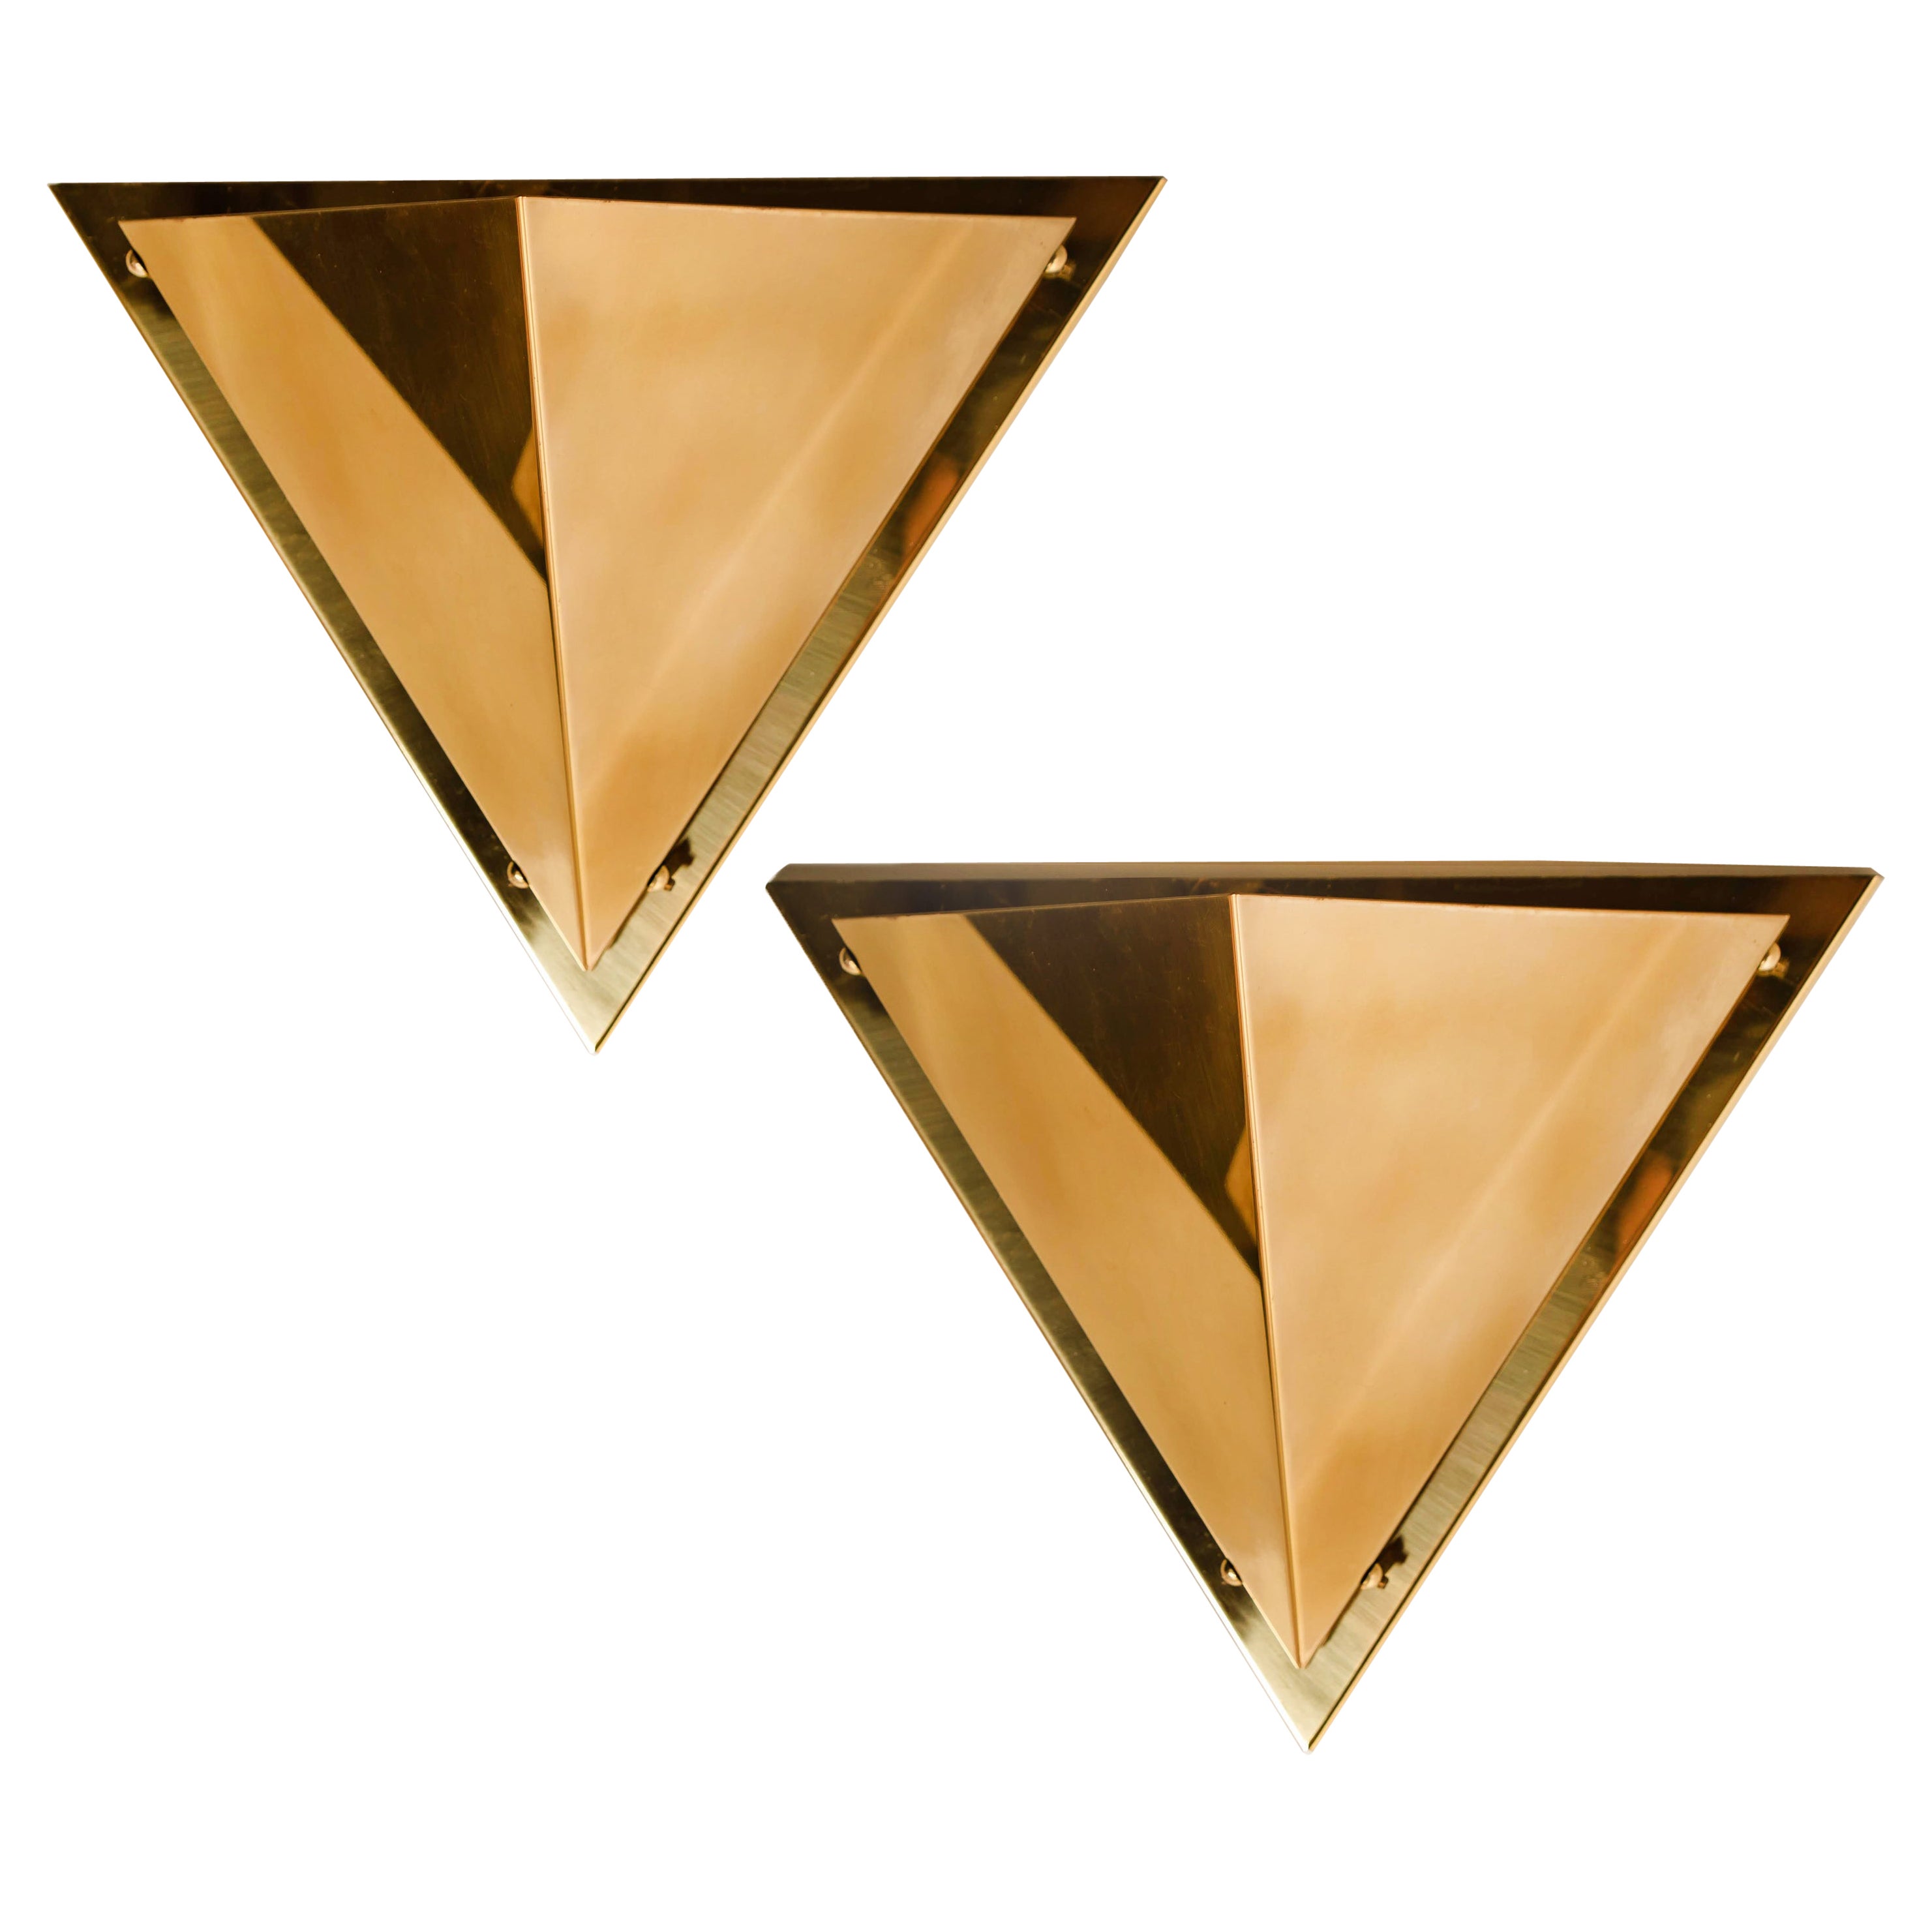 1 of the 5 Pyramid Shaped Massive Brass Wall Lamps, 1970s